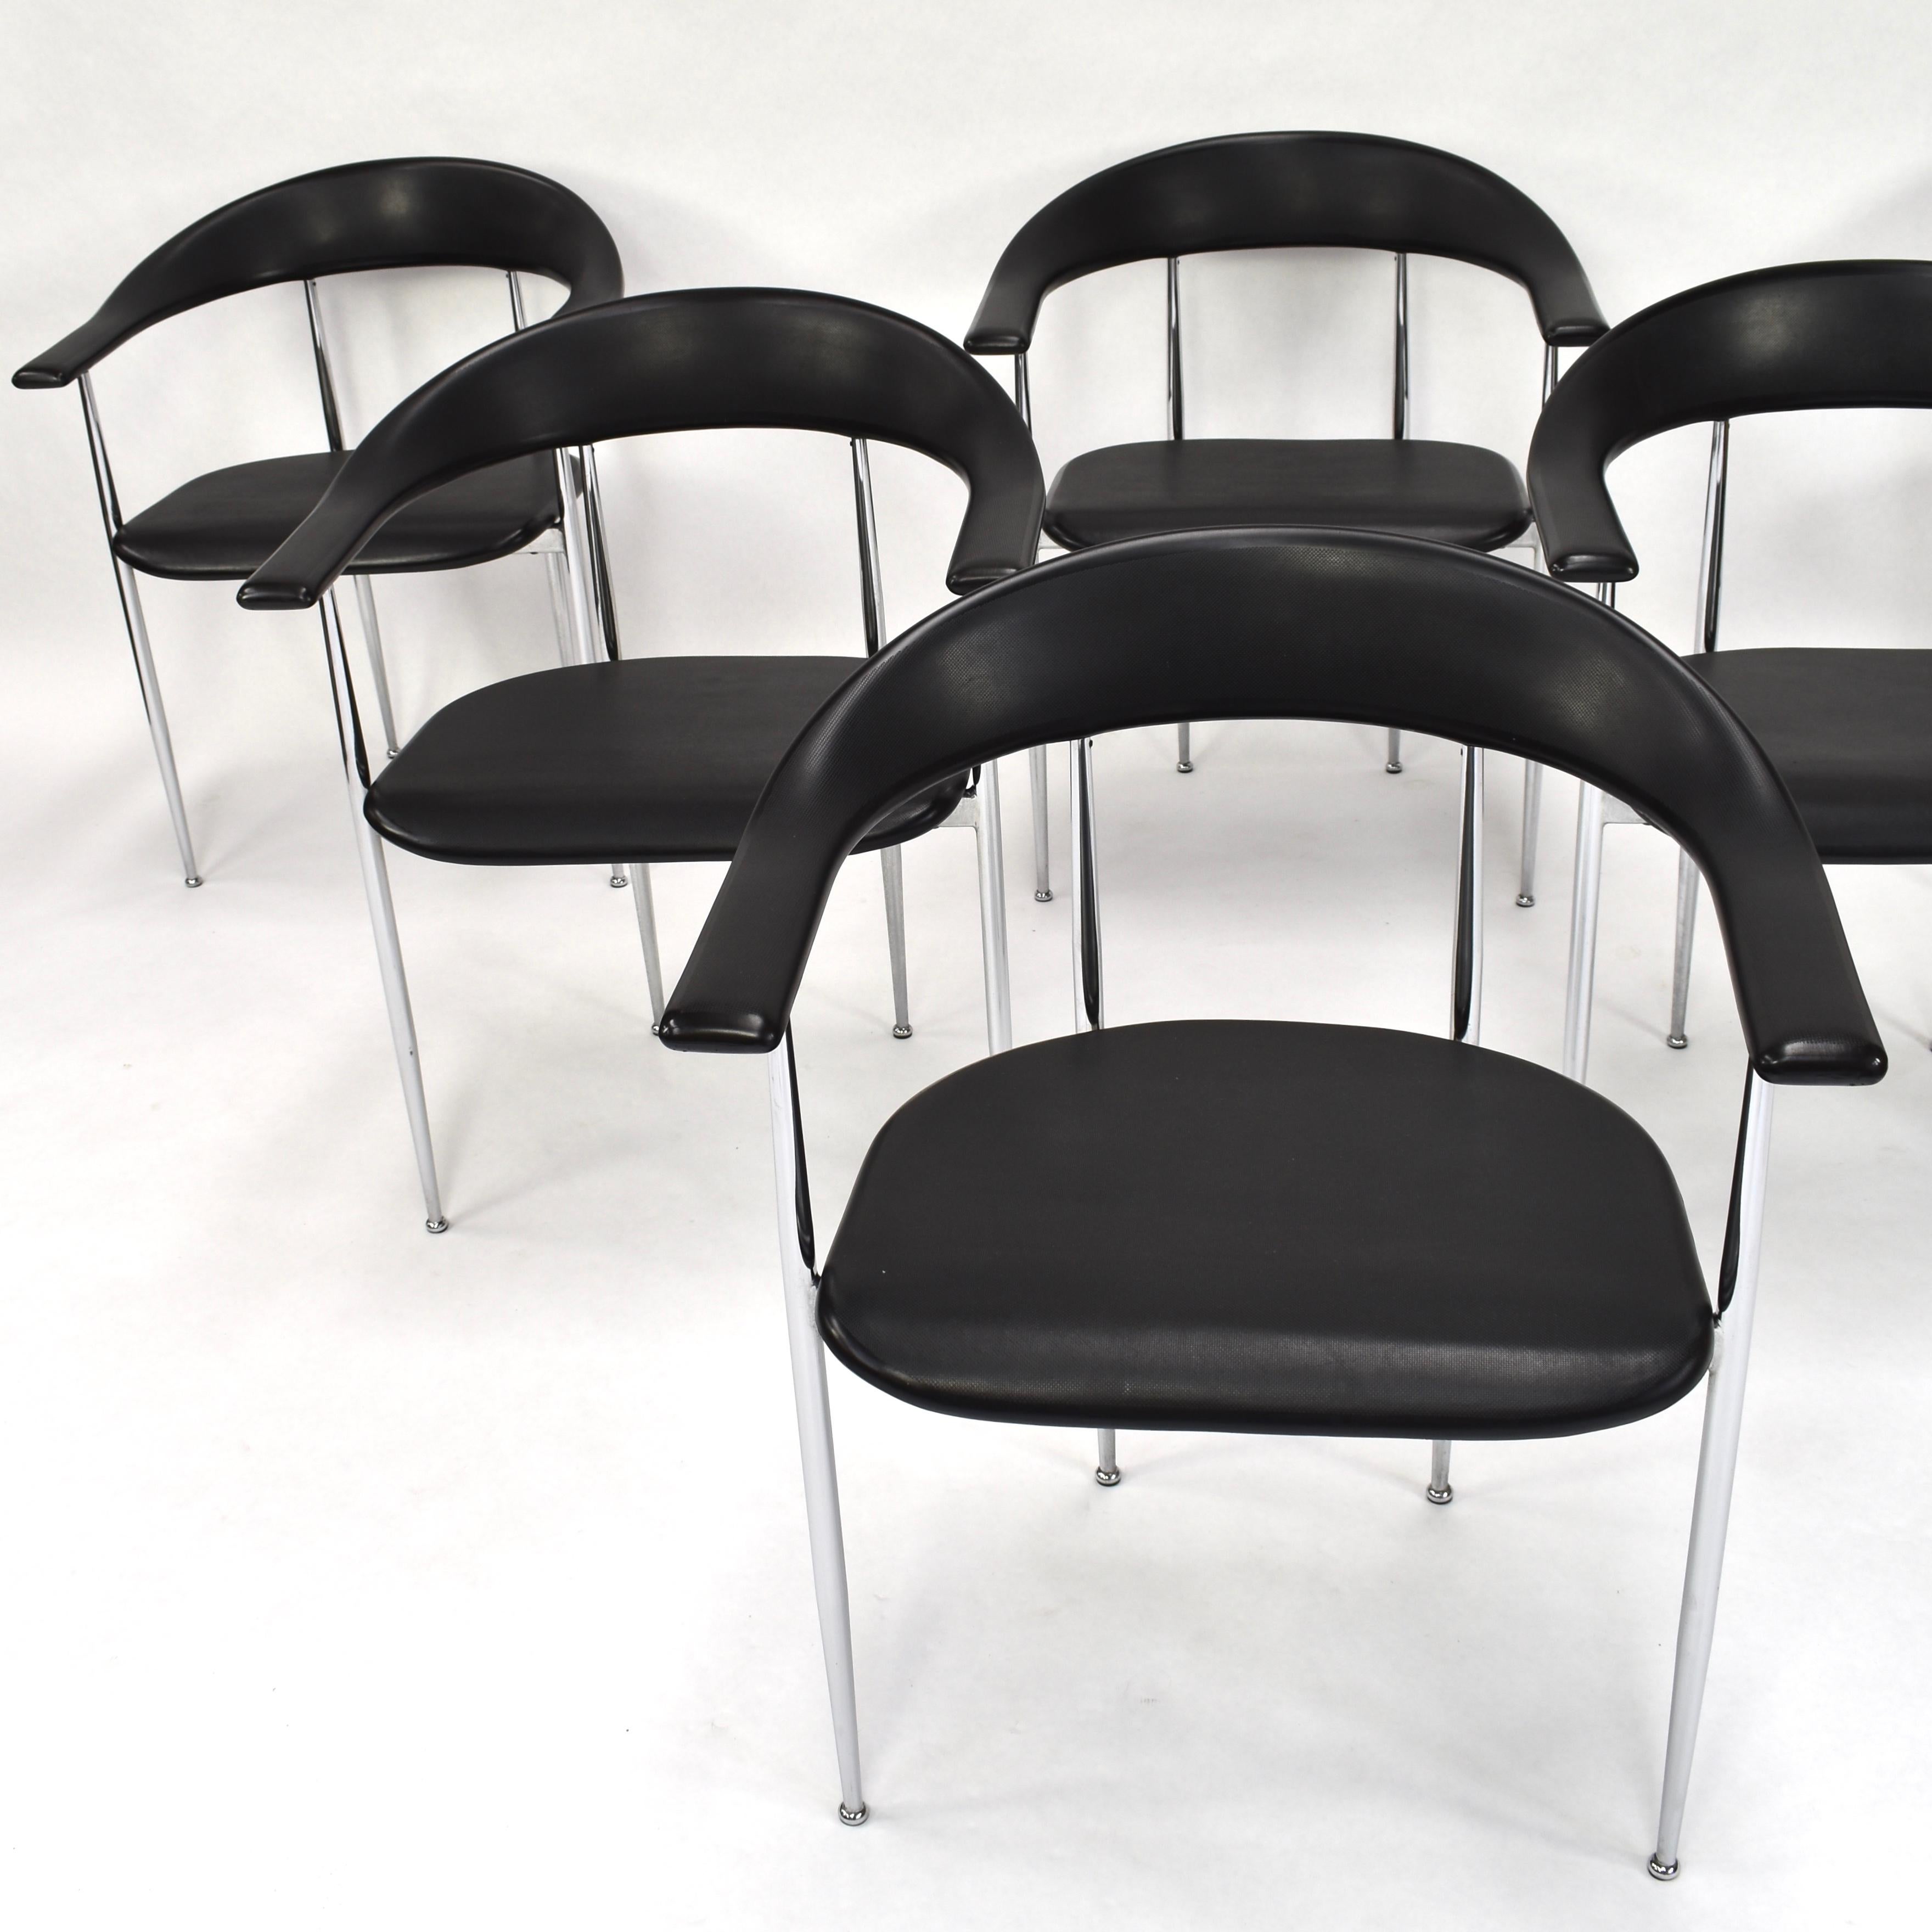 Set of six P40 dining chairs by FASEM Italy.

Designer: Giancarlo Vegni & Gianfranco Gualtierotti

Manufacturer: FASEM

Country: Italy

Model: P40 Dining chairs

Condition: Very good / Minor signs of age and use / Chrome also in very good